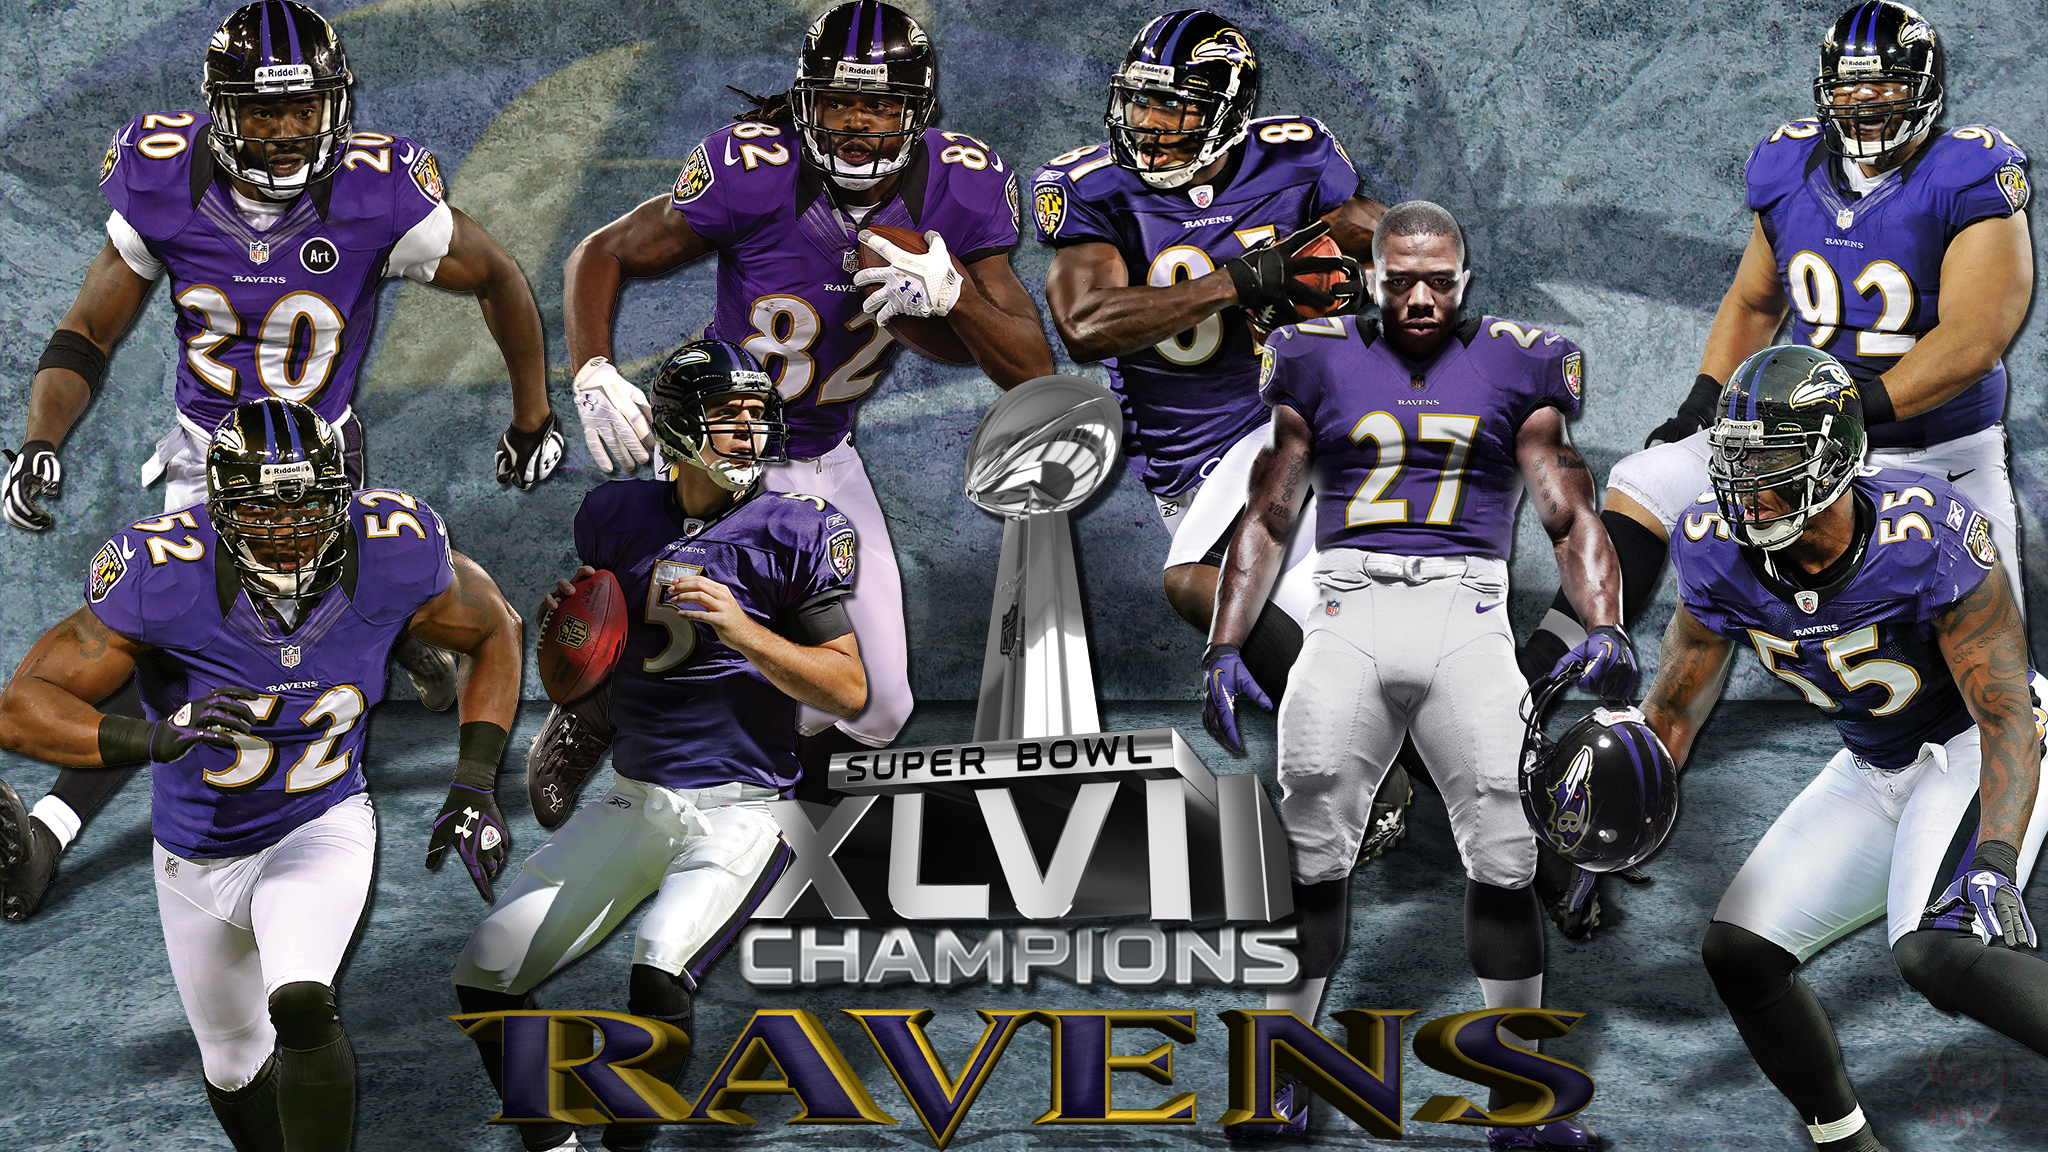 Wallpapers By Wicked Shadows: Baltimore Ravens Super Bowl XLVII Champions Wallpaper2048 x 1152